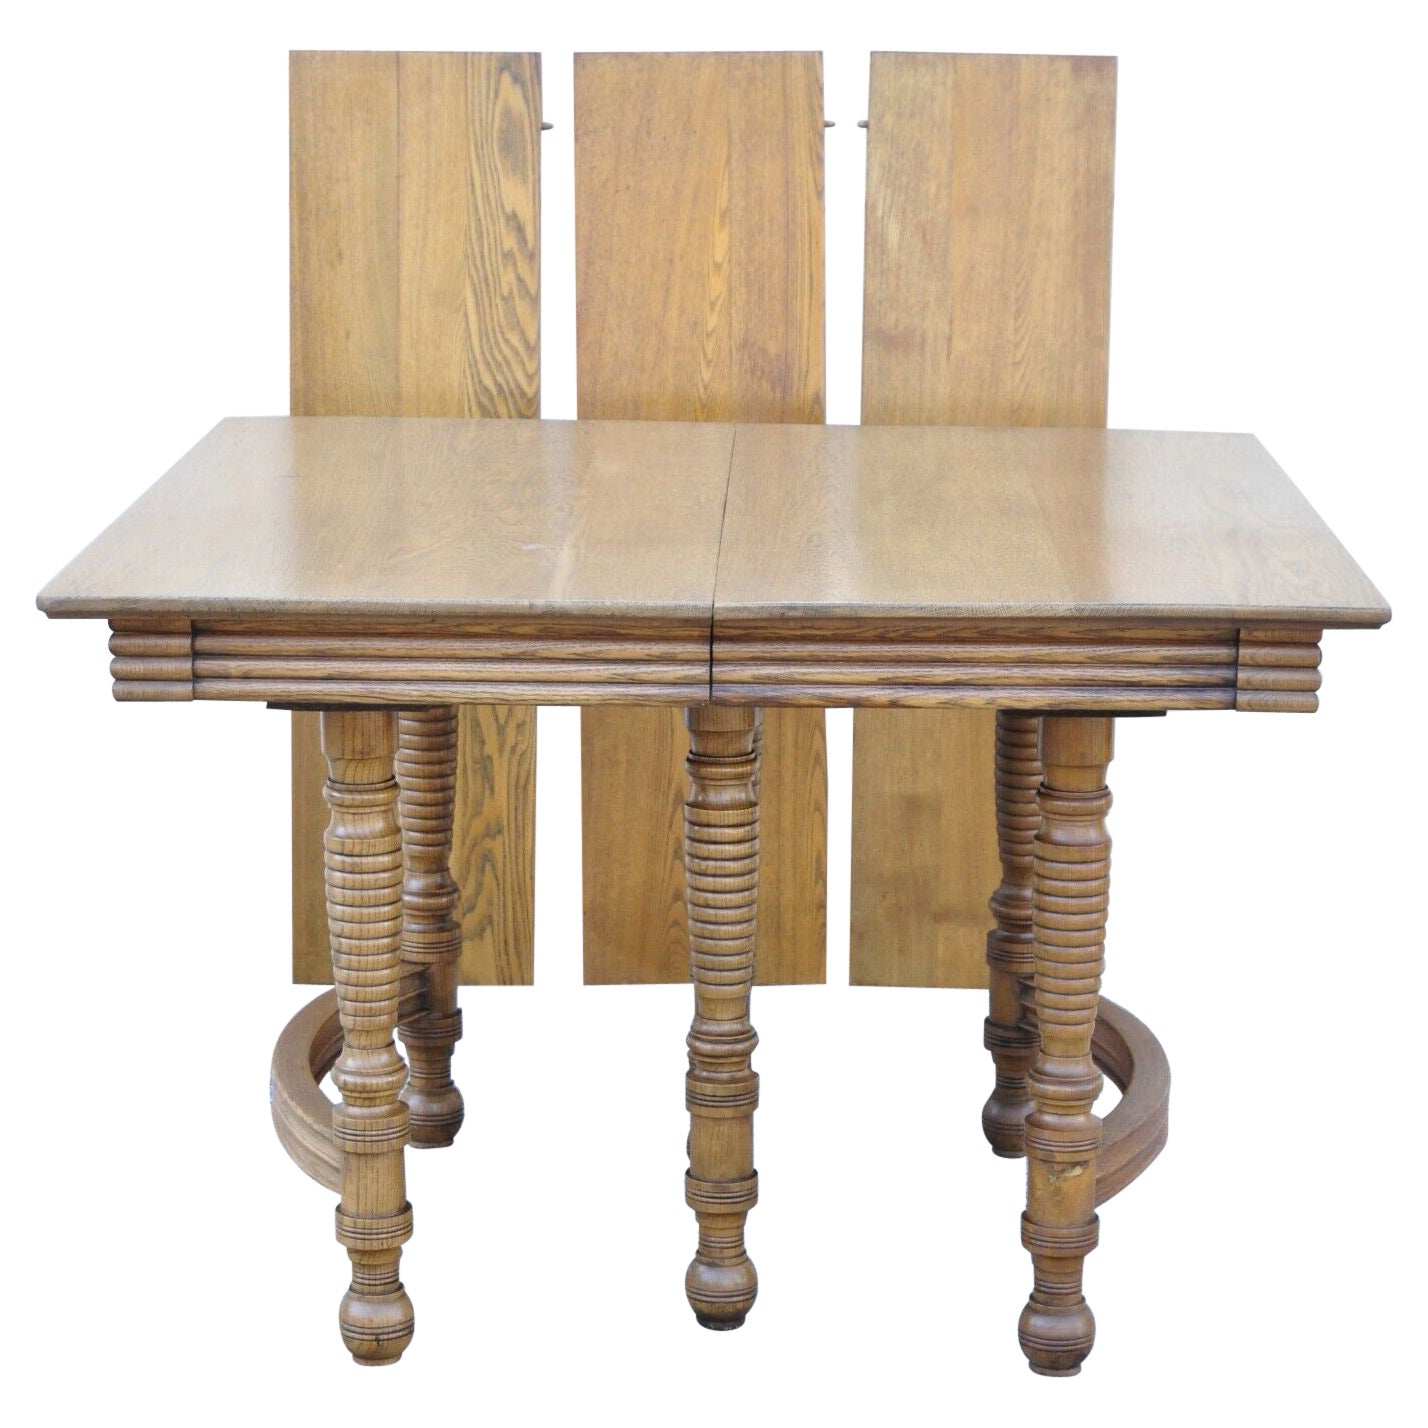 Antique American Victorian Oak Wood Square Extension Dining Table with 3 Leaves For Sale